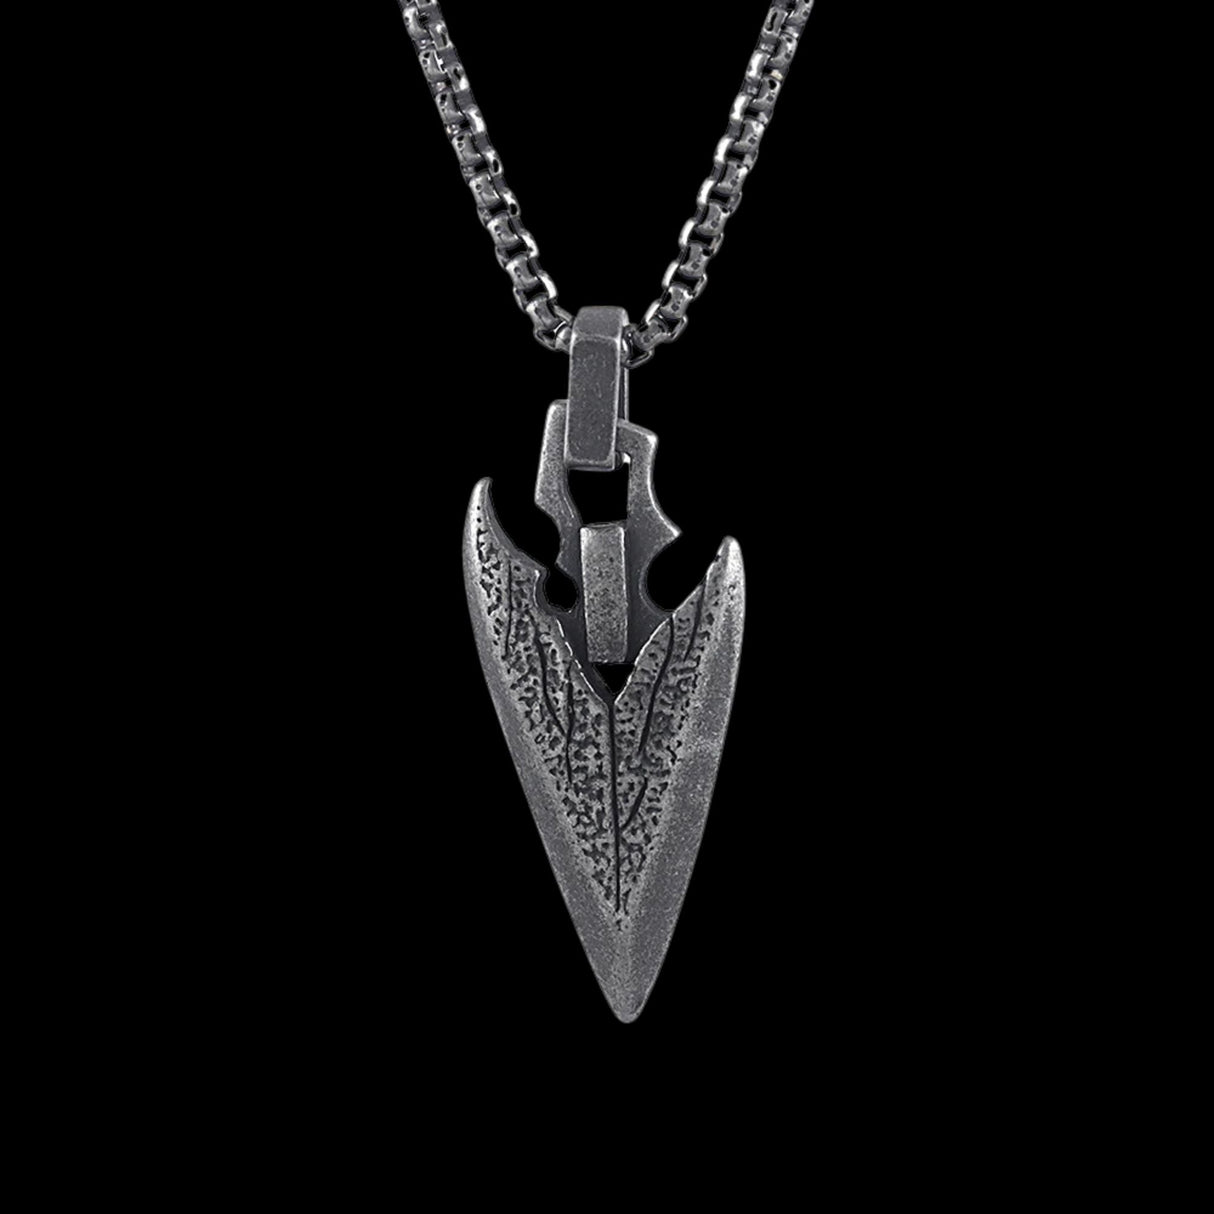 Viking Spearhead Necklace